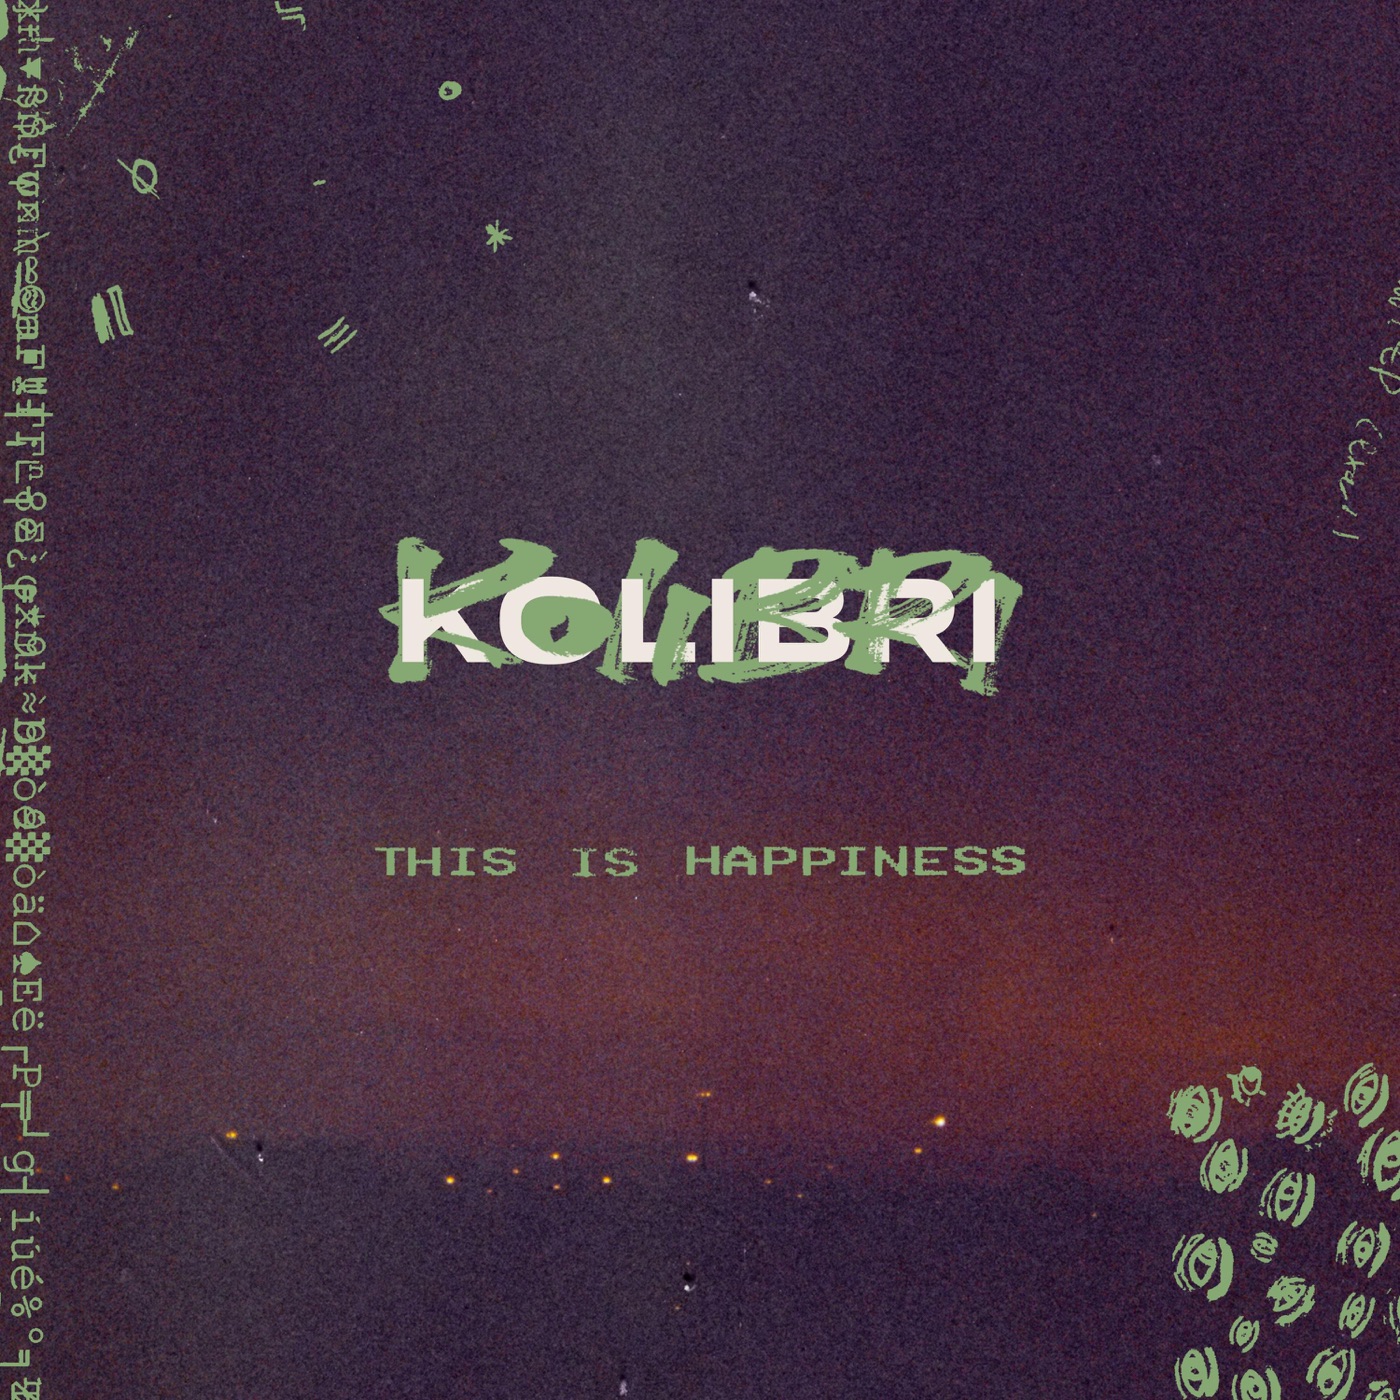 This Is Happiness by Kolibri